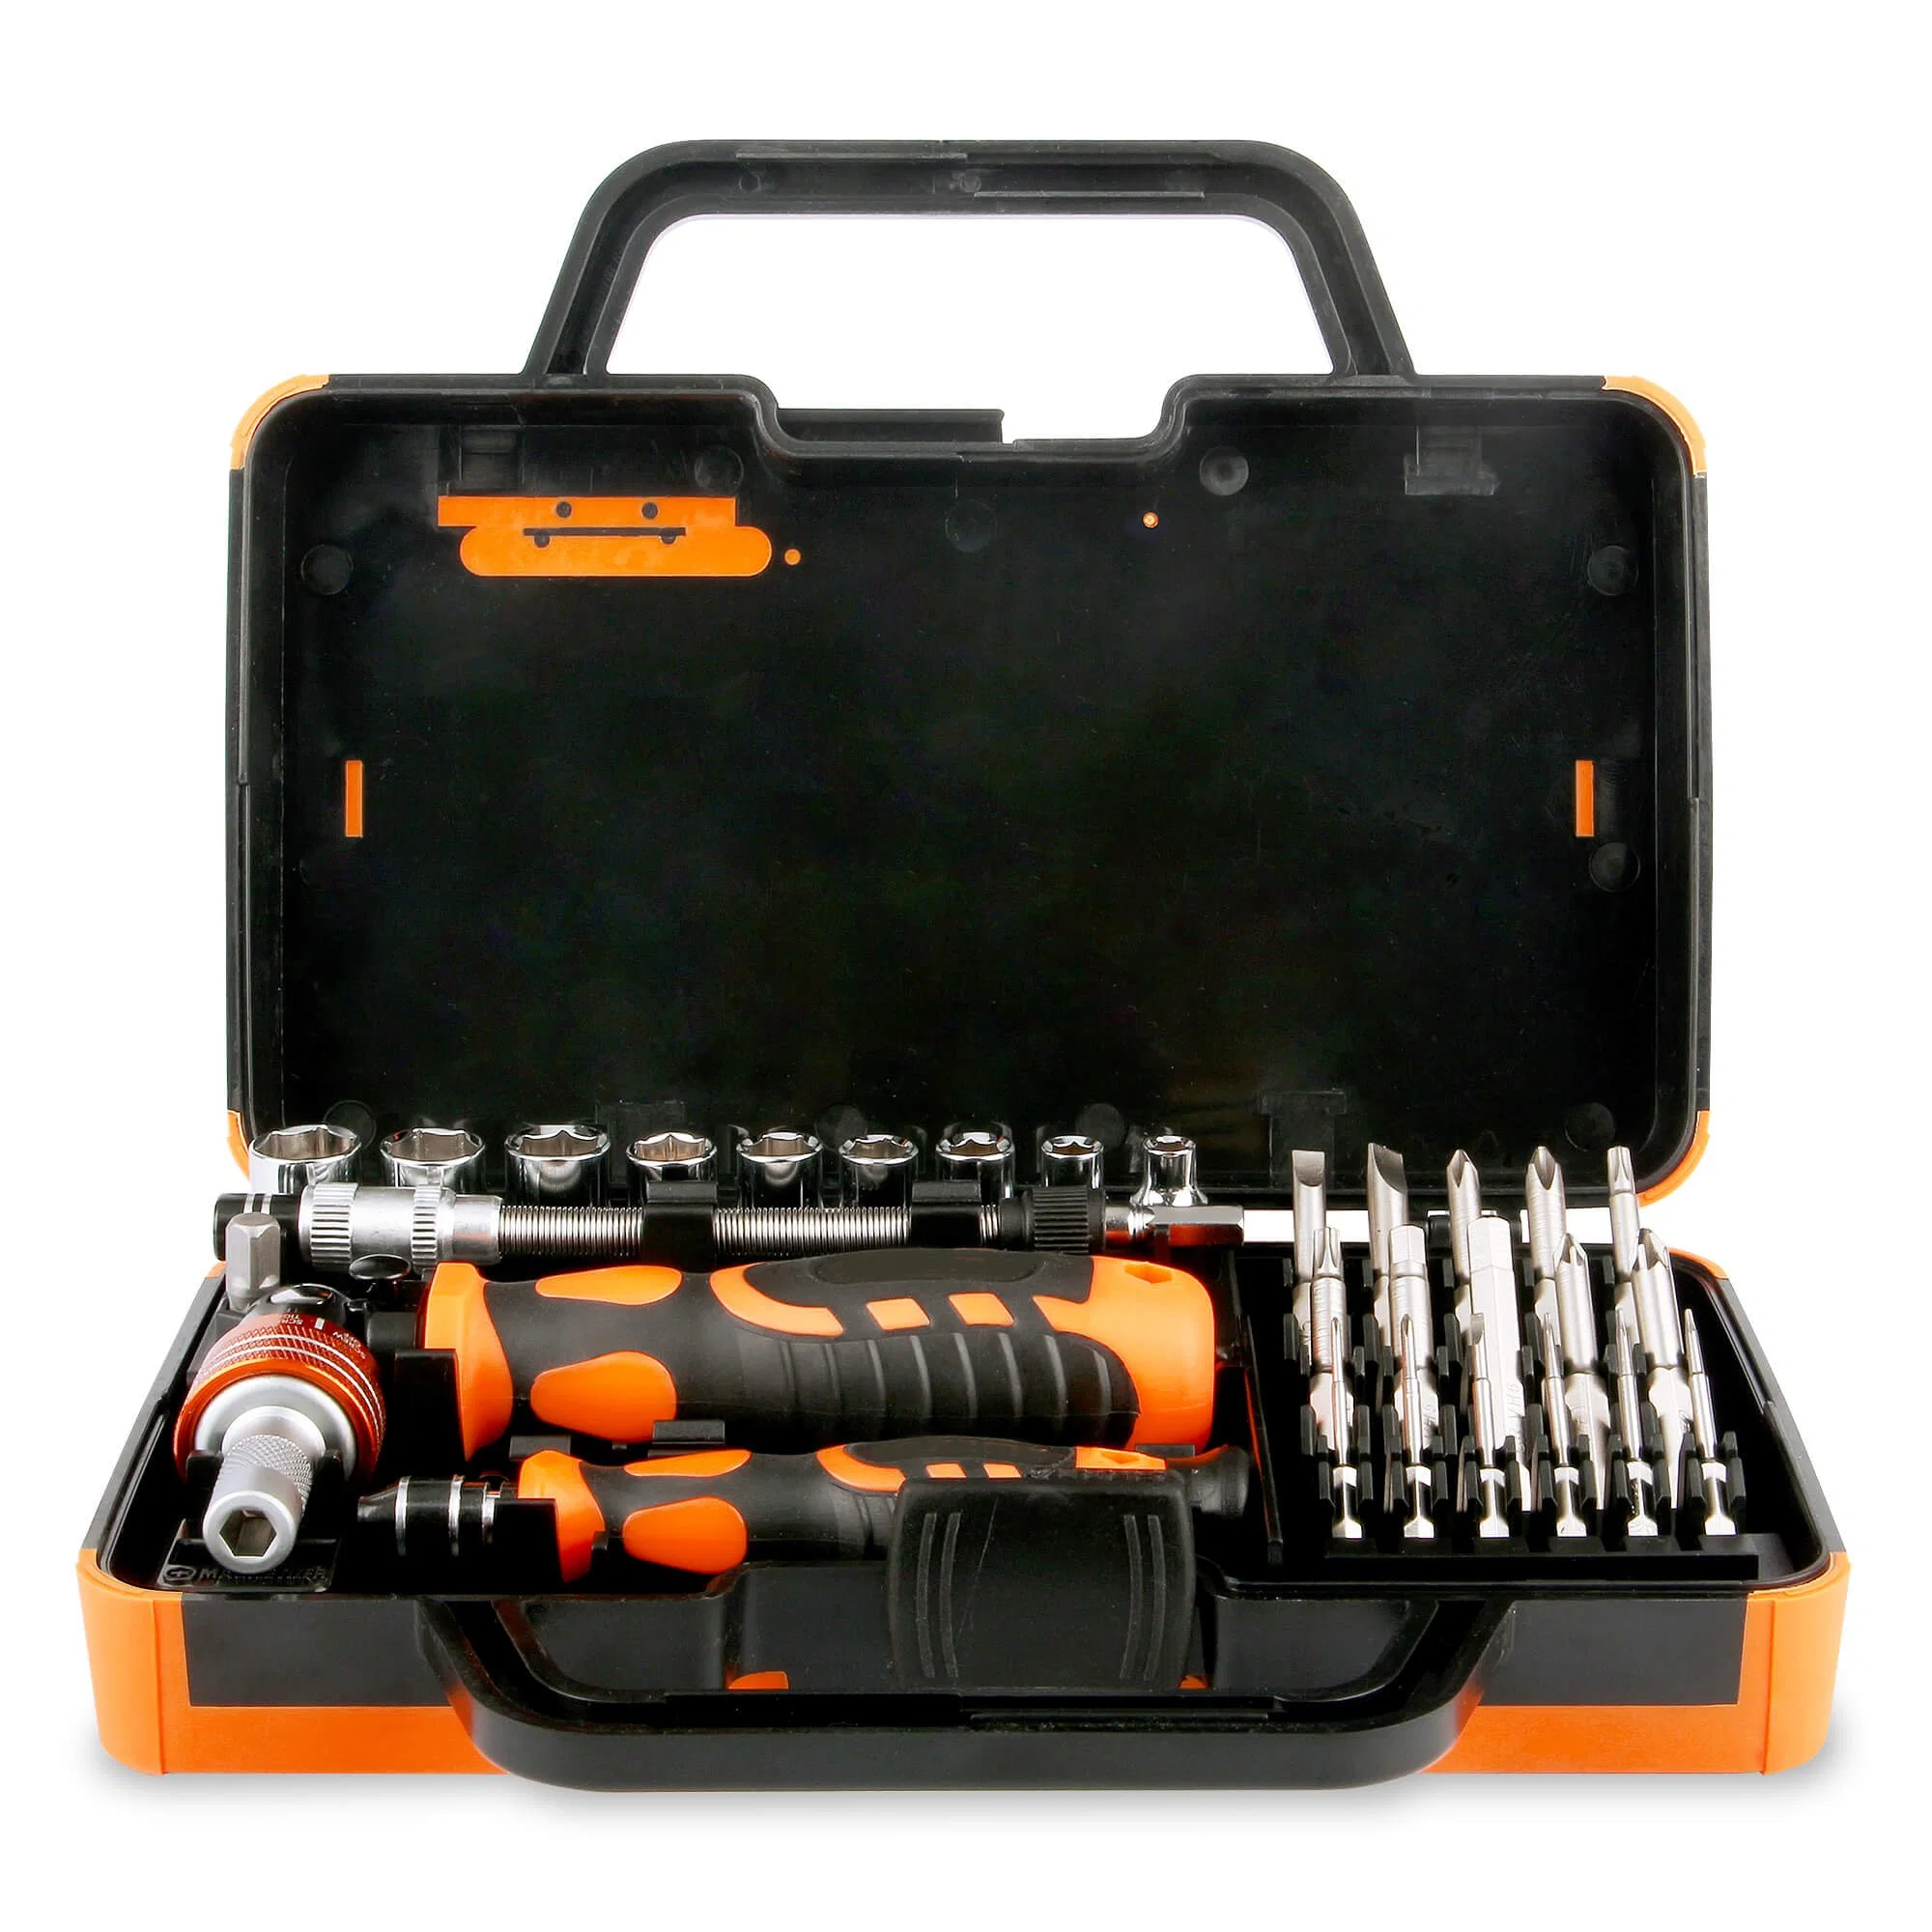 31 in 1 Professional Repair Hand Tool Set with Rotatable Ratchet Handle